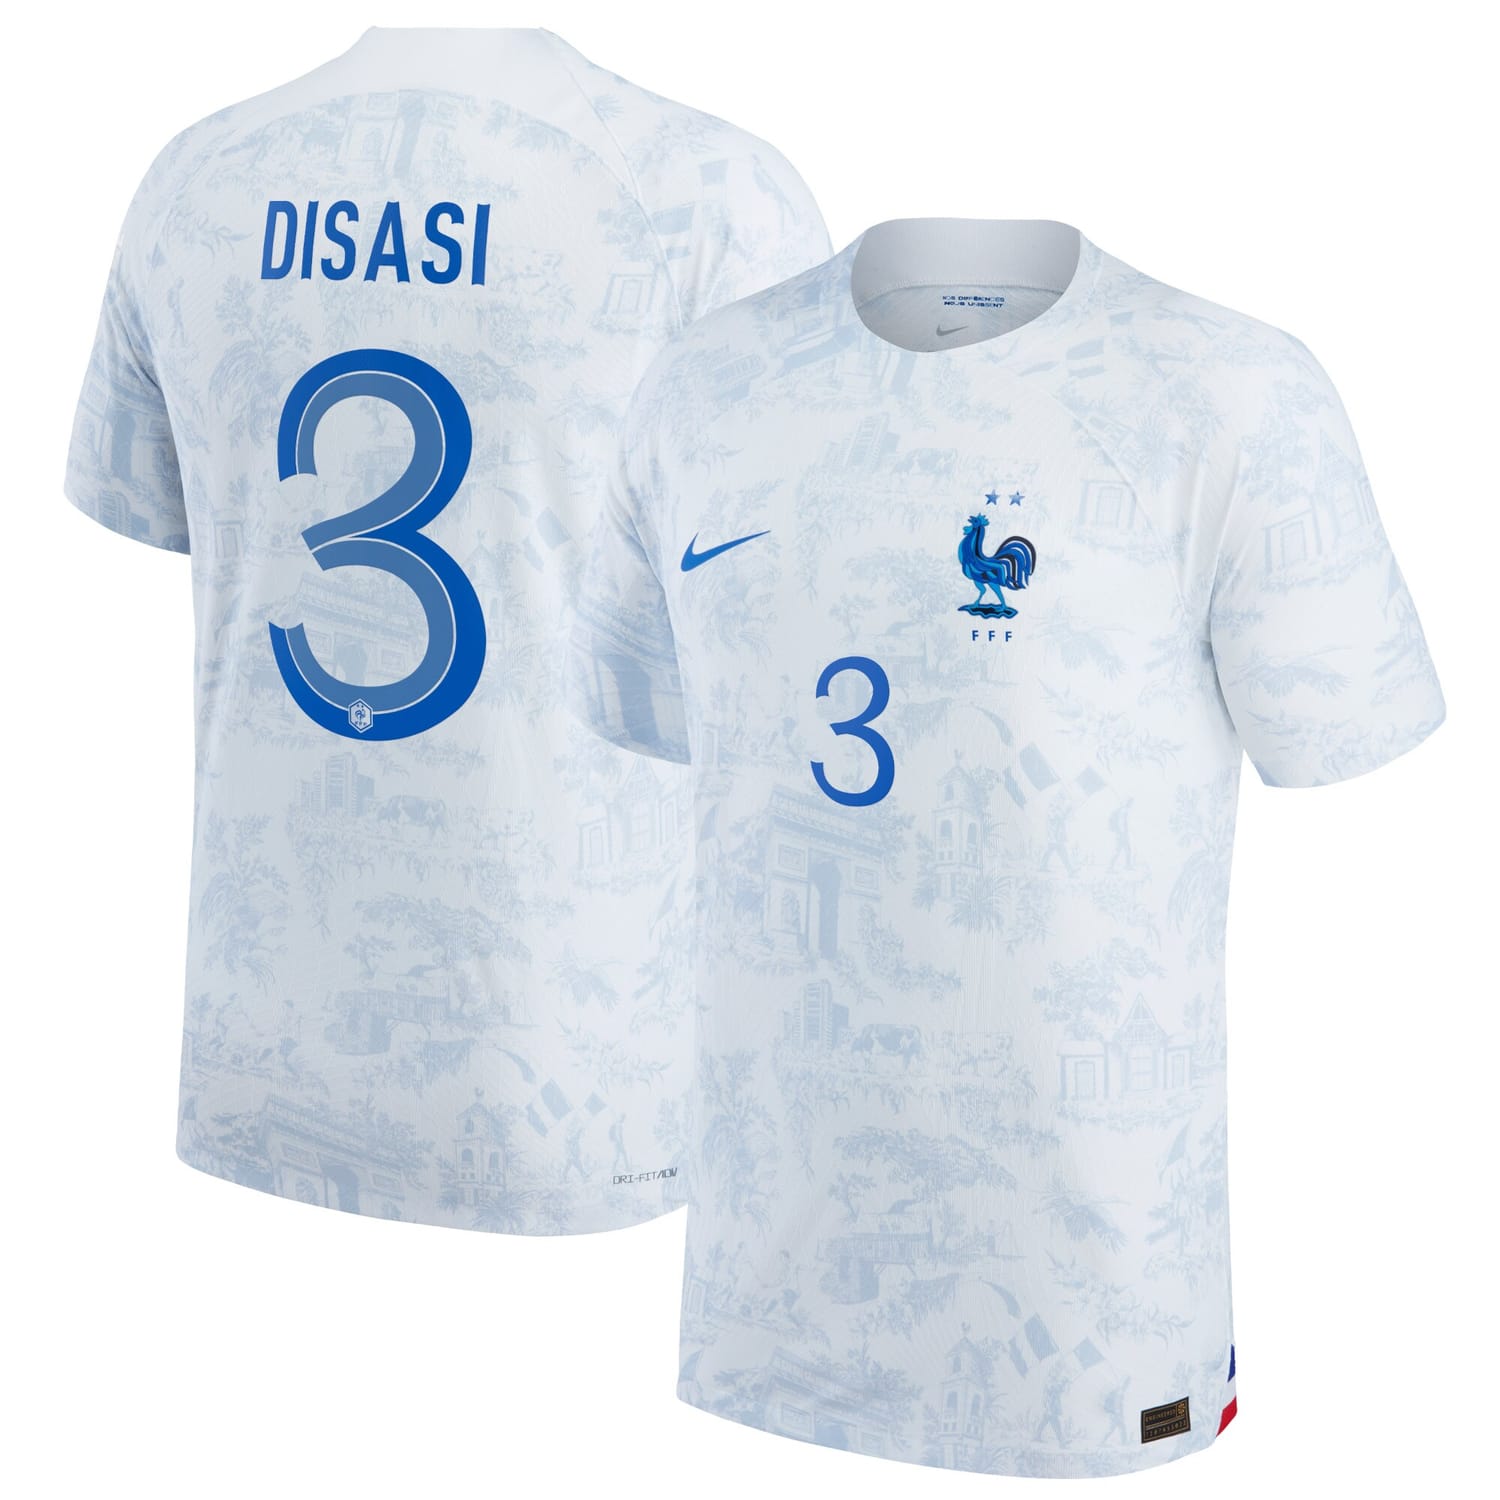 France National Team Away Authentic Jersey Shirt 2022 player Axel Disasi printing for Men